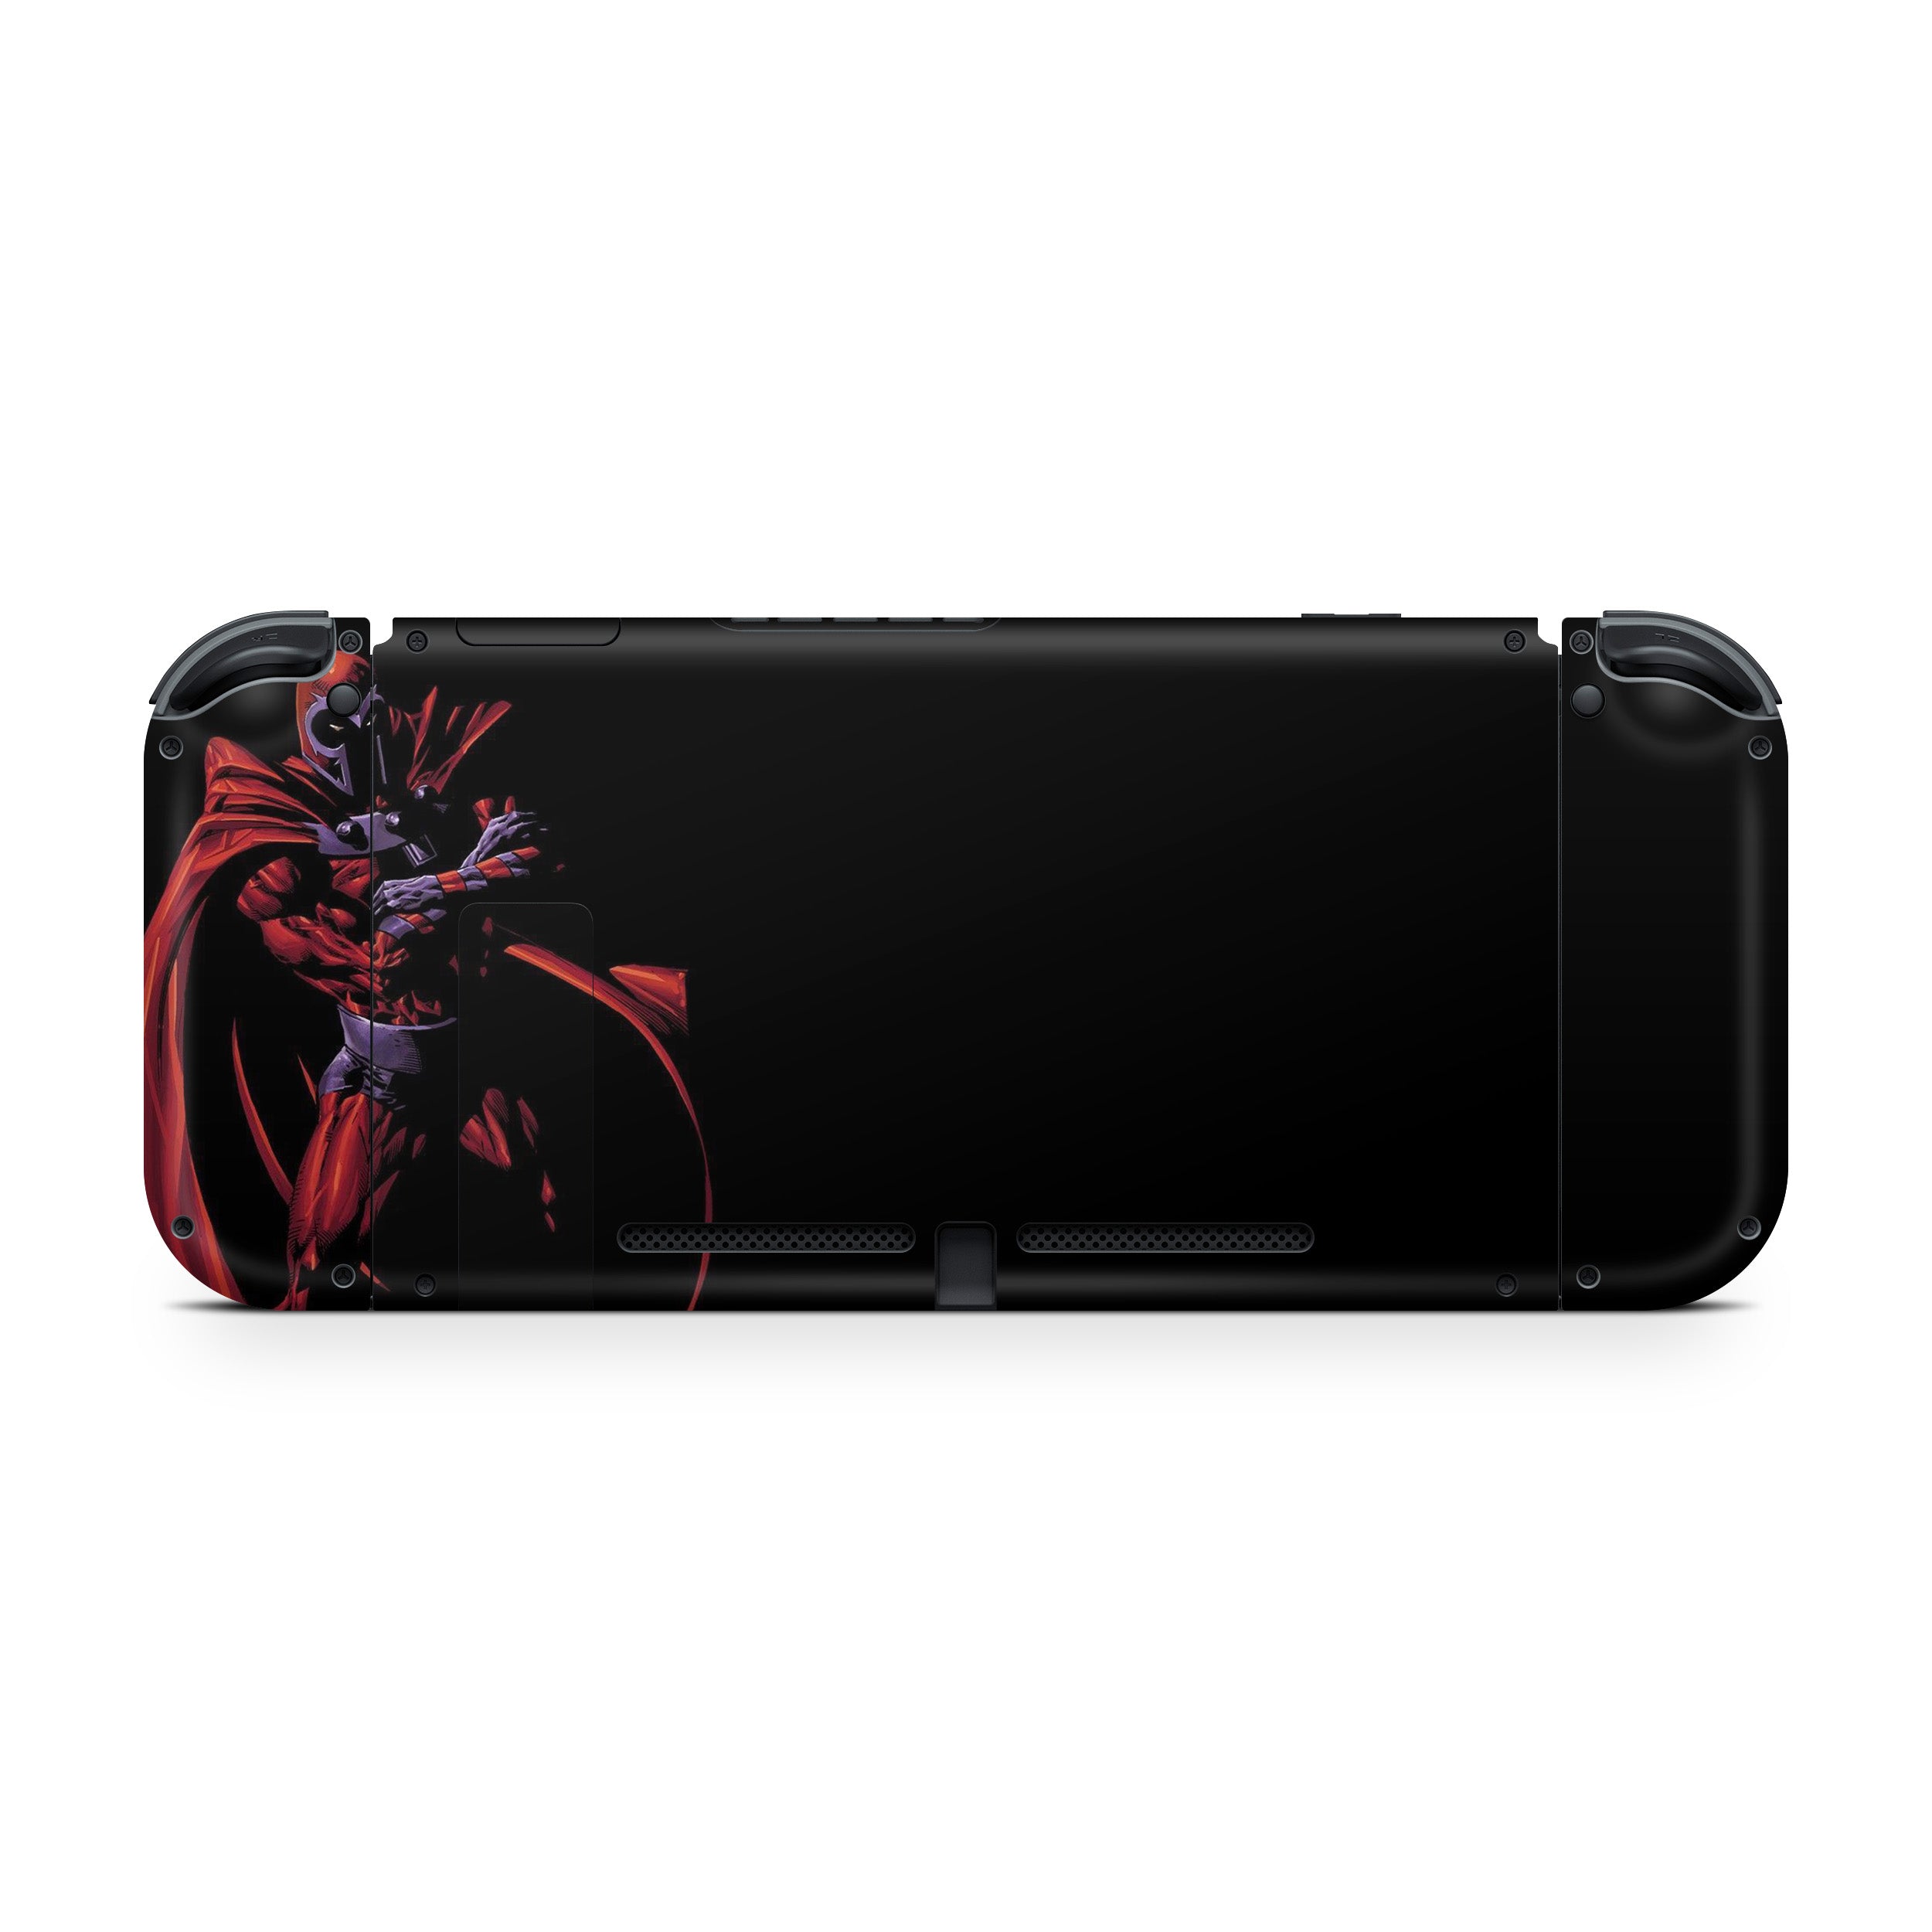 A video game skin featuring a Marvel X Men Magneto design for the Nintendo Switch.